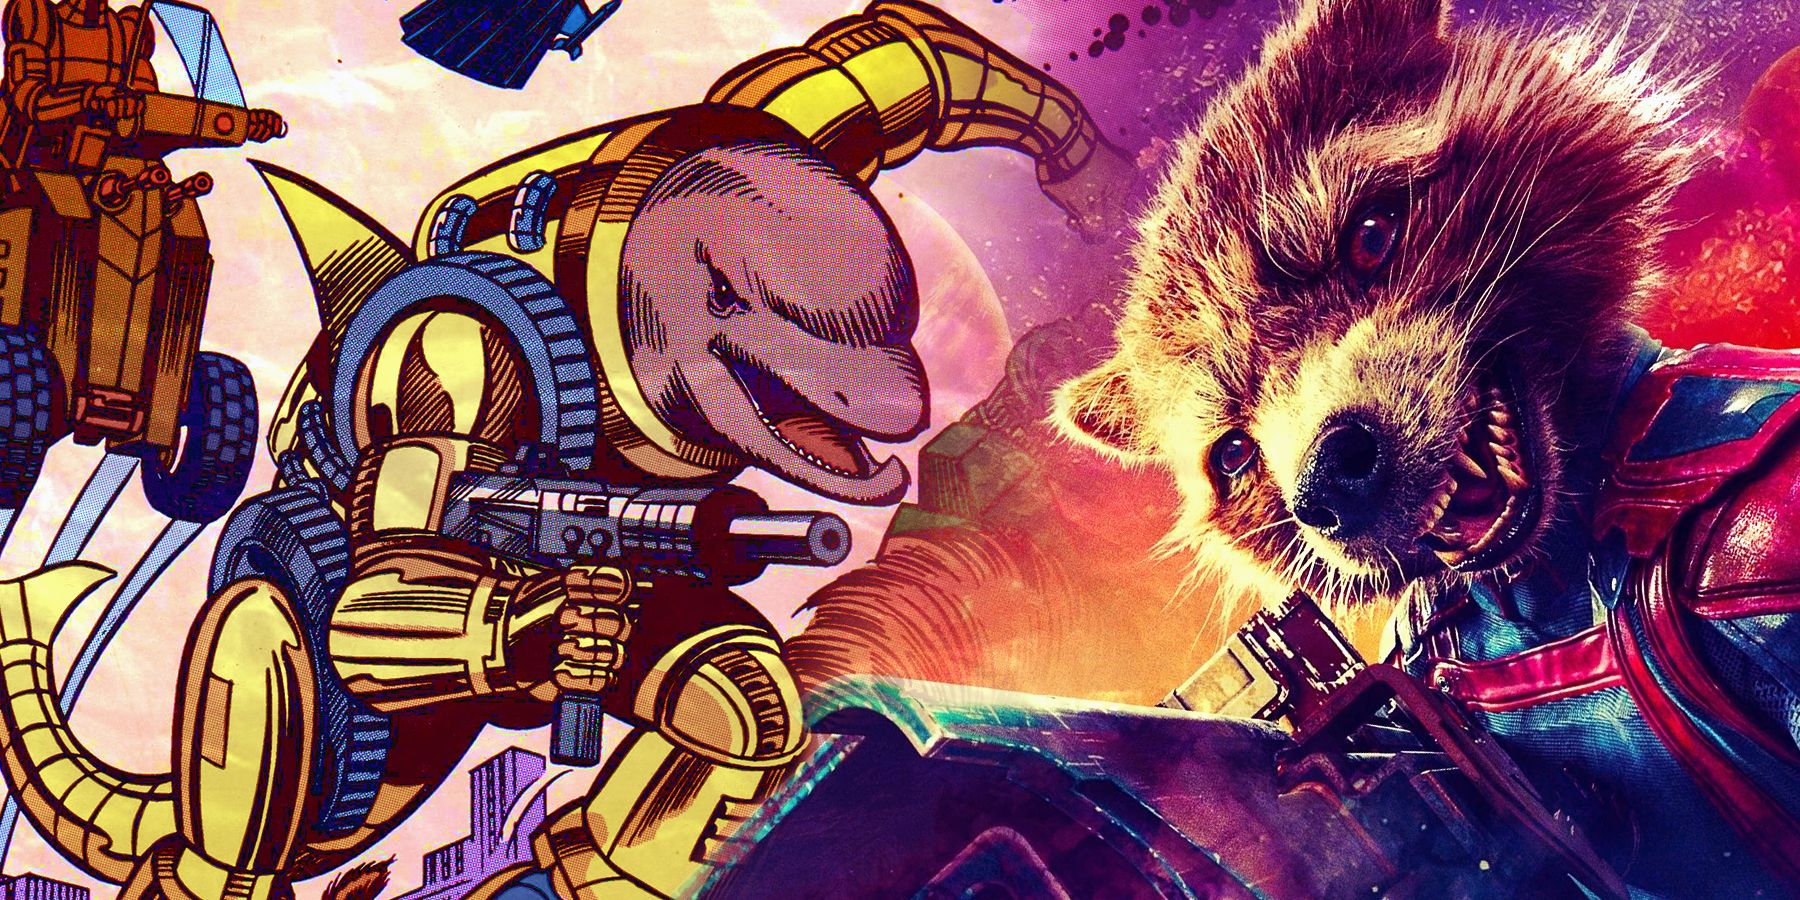 Rocket Raccoon from the MCU and Dr. Echo from comic Brute Force